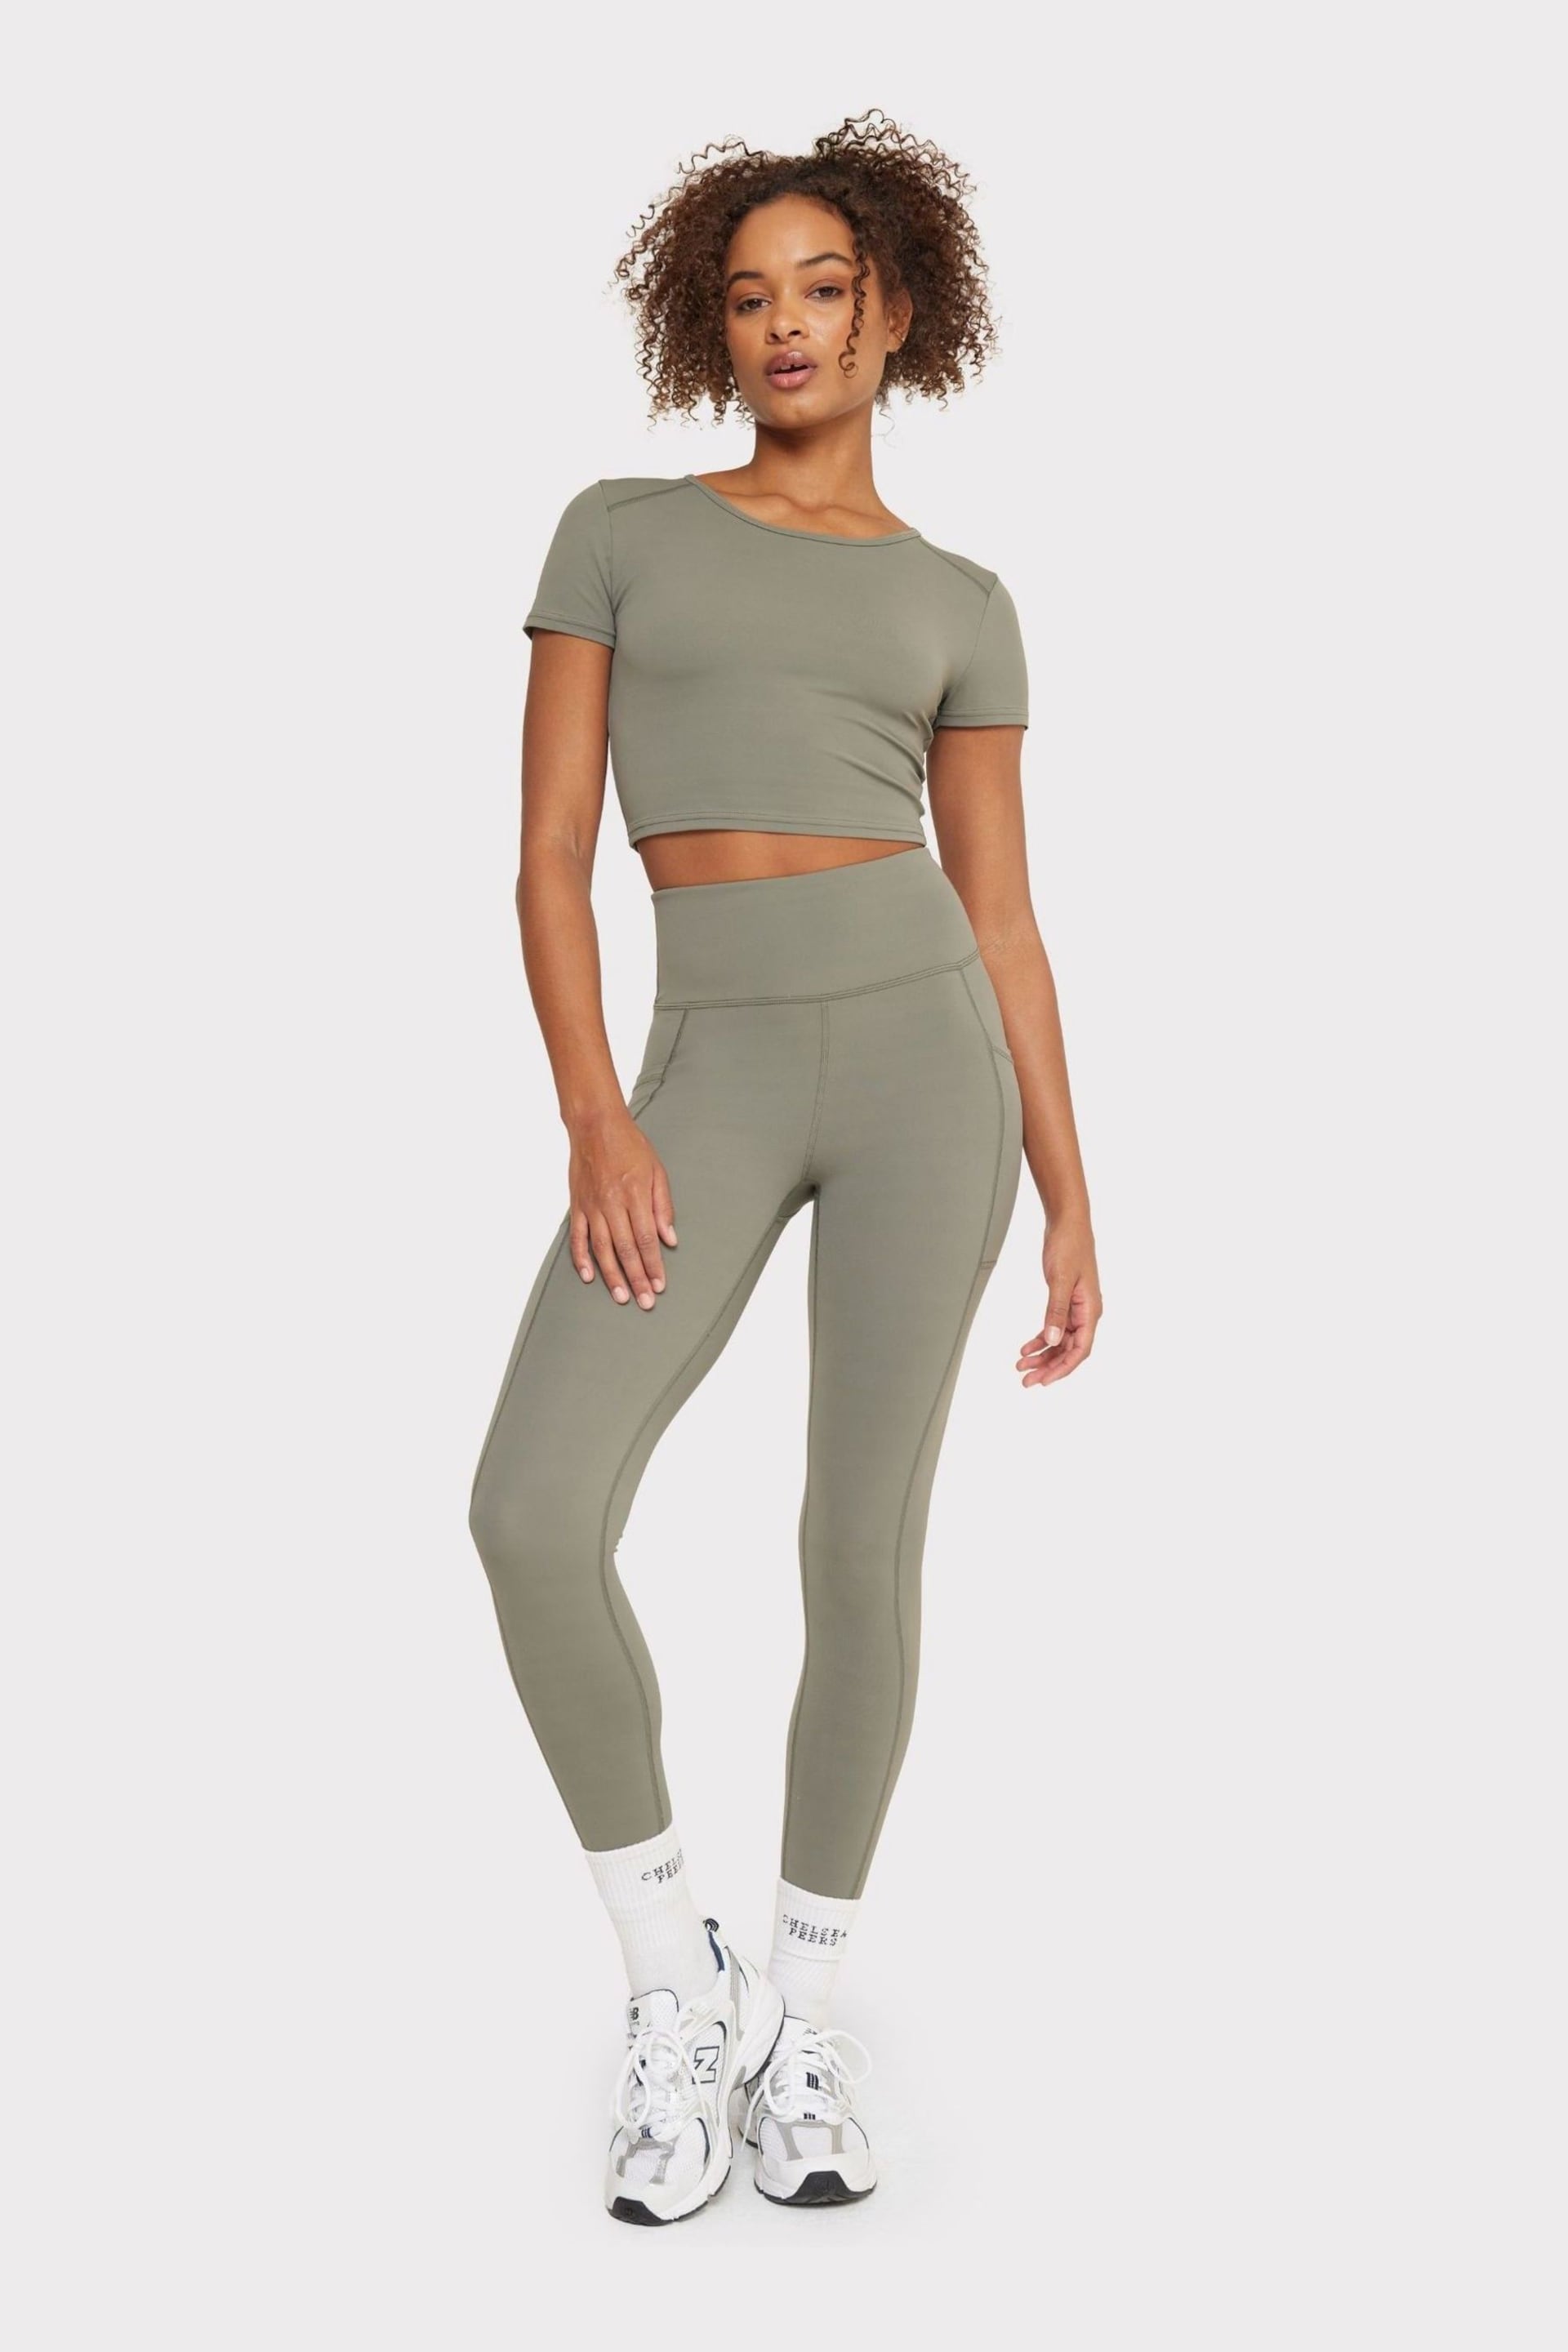 Chelsea Peers Green Soft Stretch High-Rise Leggings - Image 3 of 5